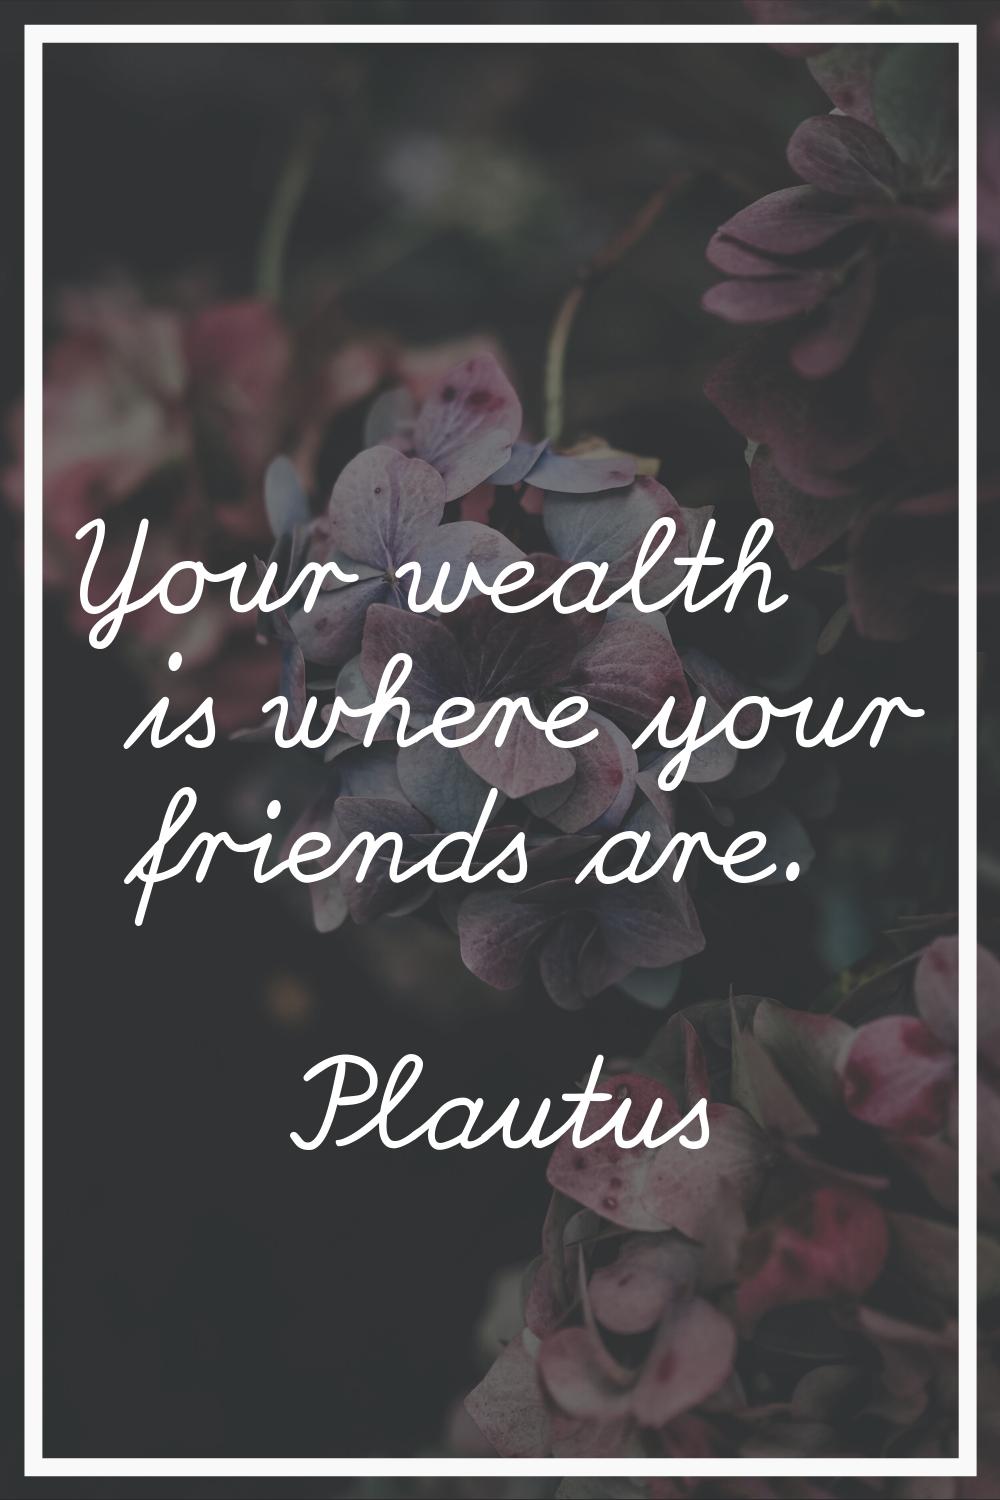 Your wealth is where your friends are.